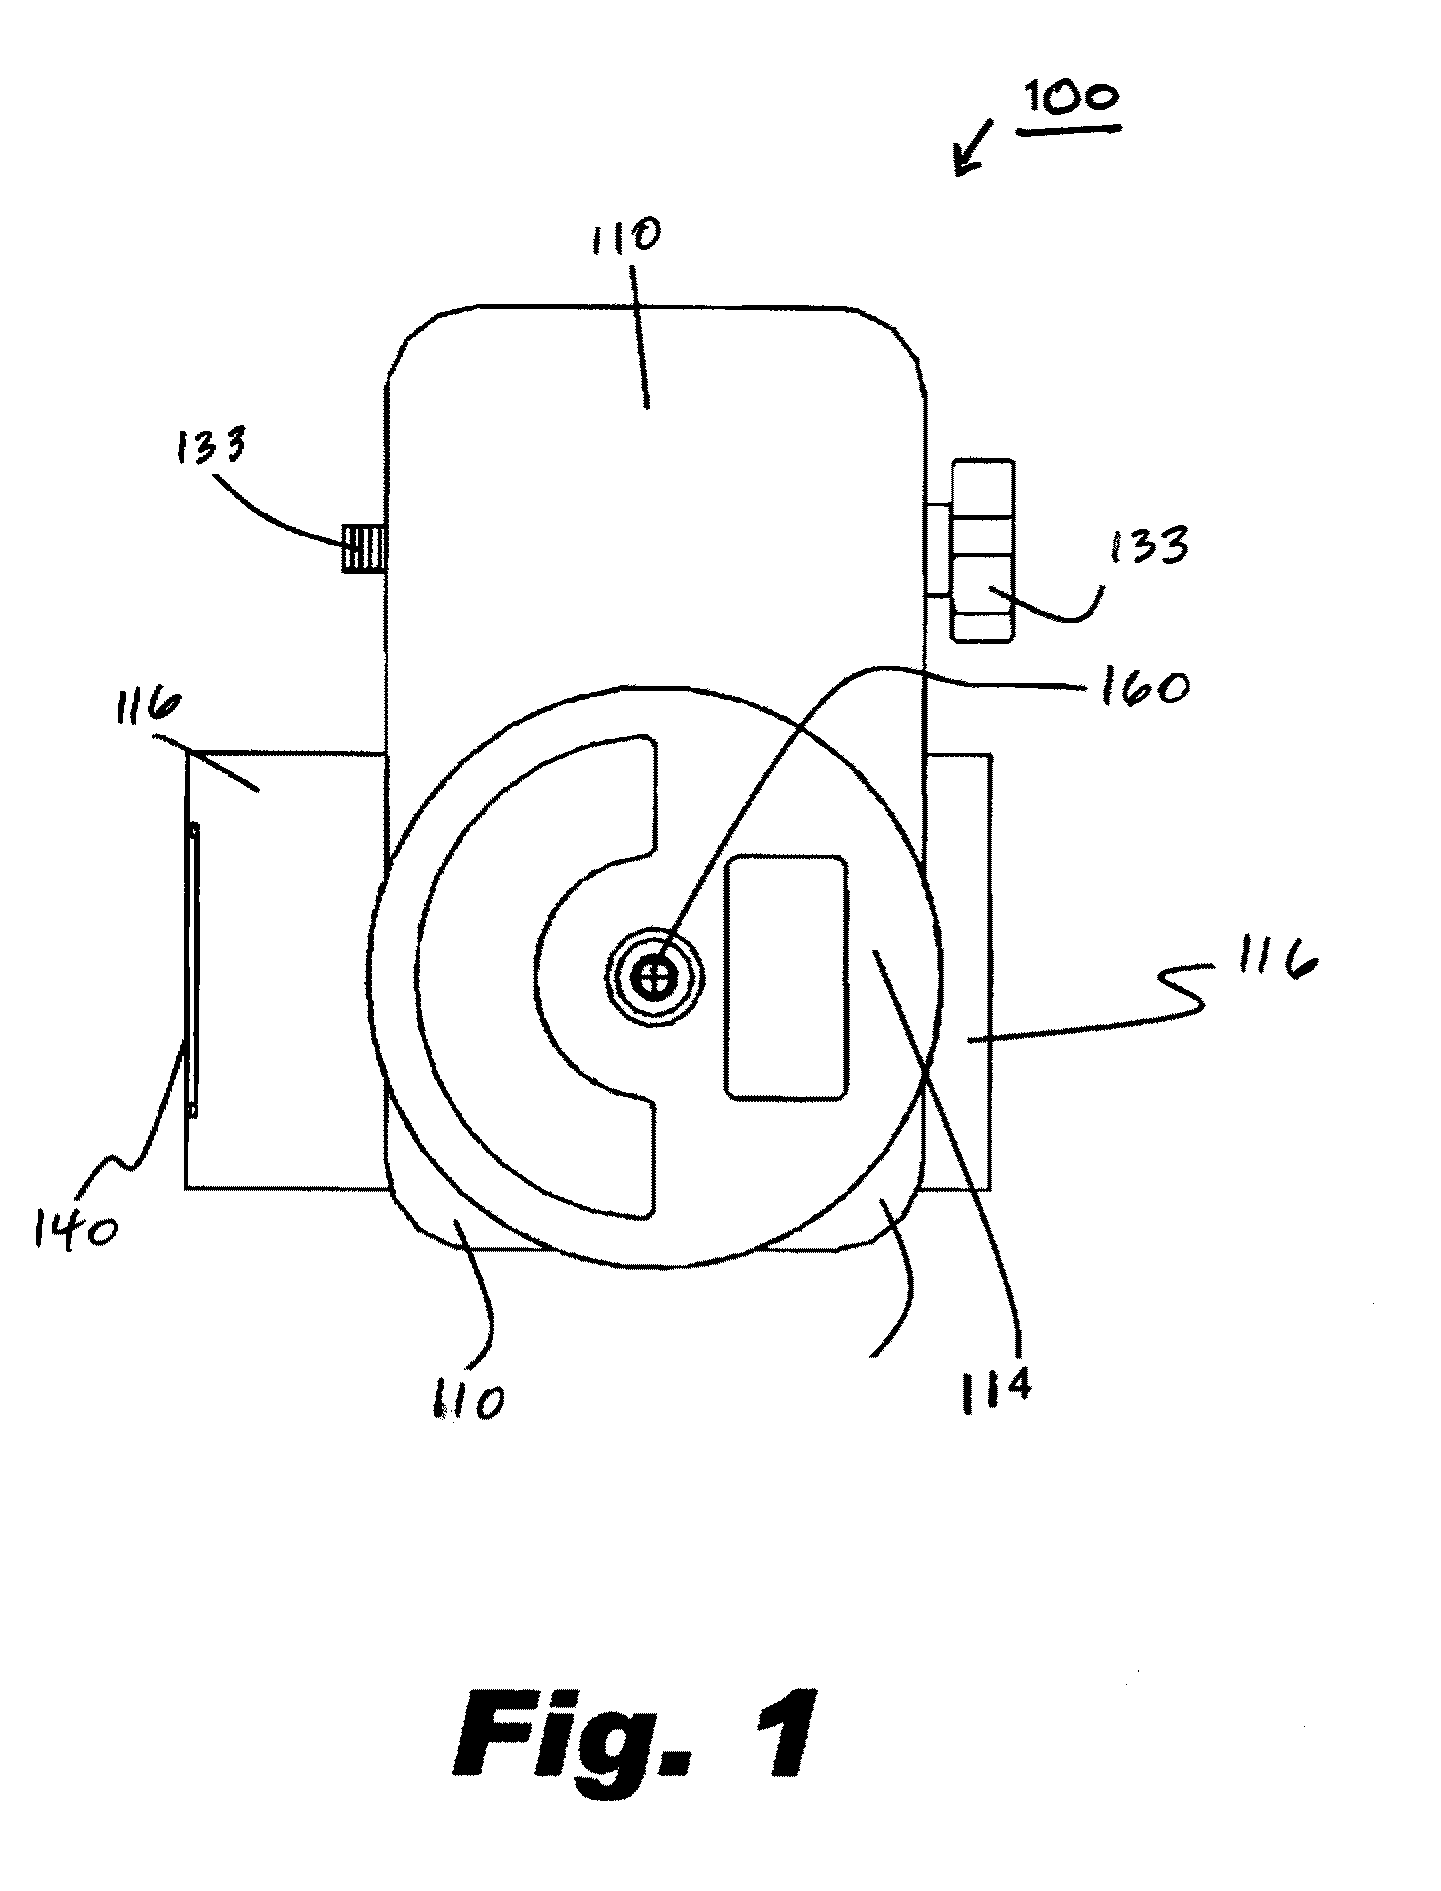 High voltage to low voltage inductive power supply with current sensor